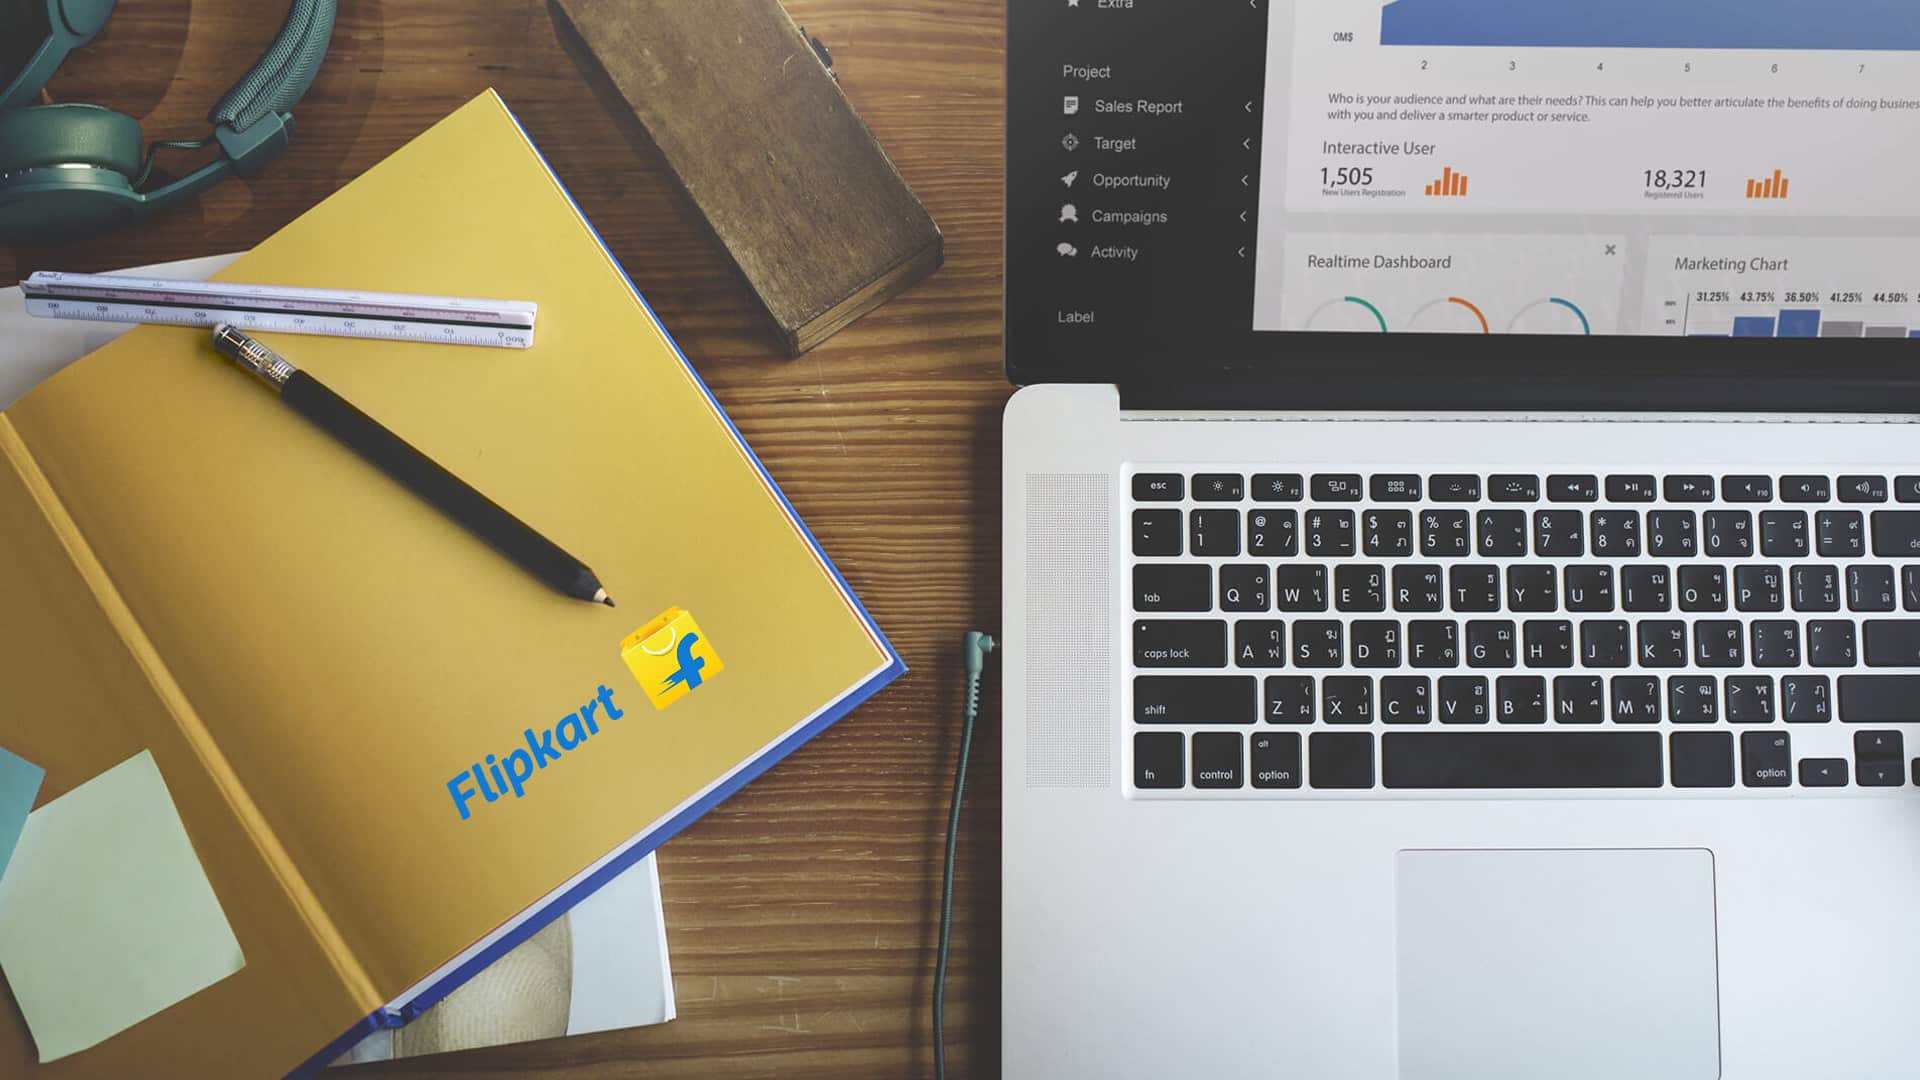 Flipkart launches digital academy to accelerate skill building for e-commerce logistics sector